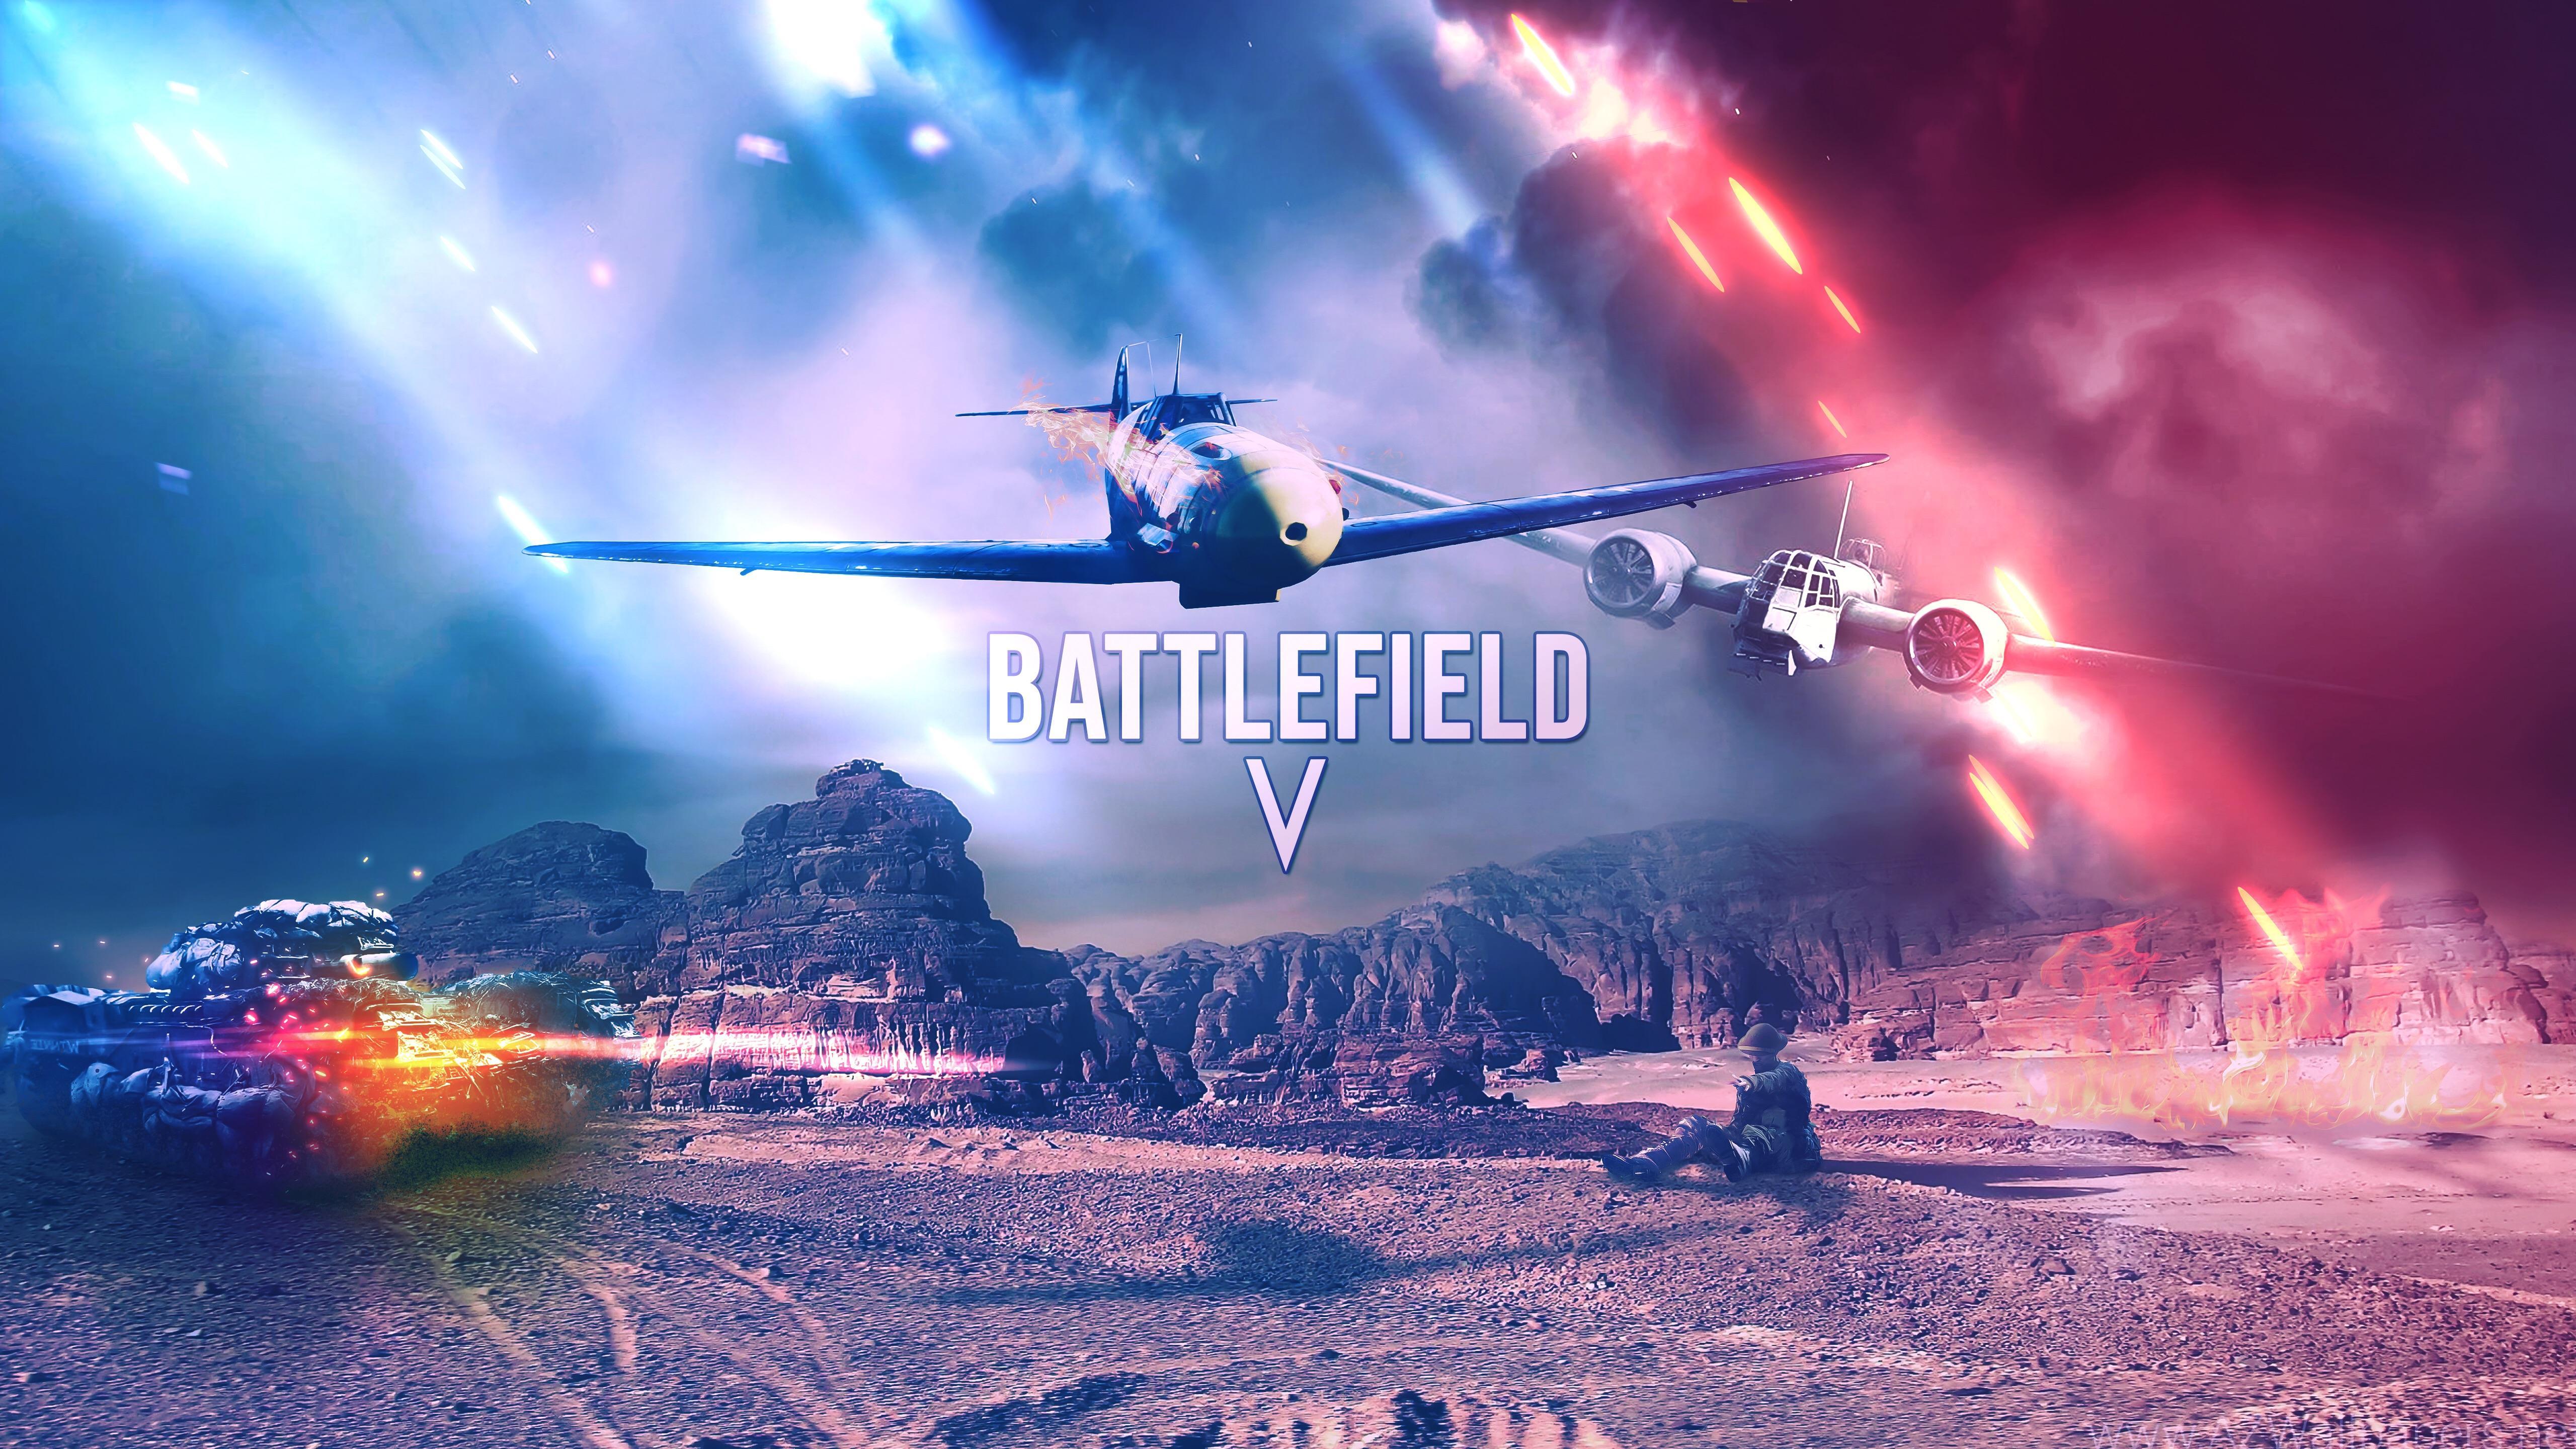 Bfv Wallpapers Top Free Bfv Backgrounds Wallpaperaccess